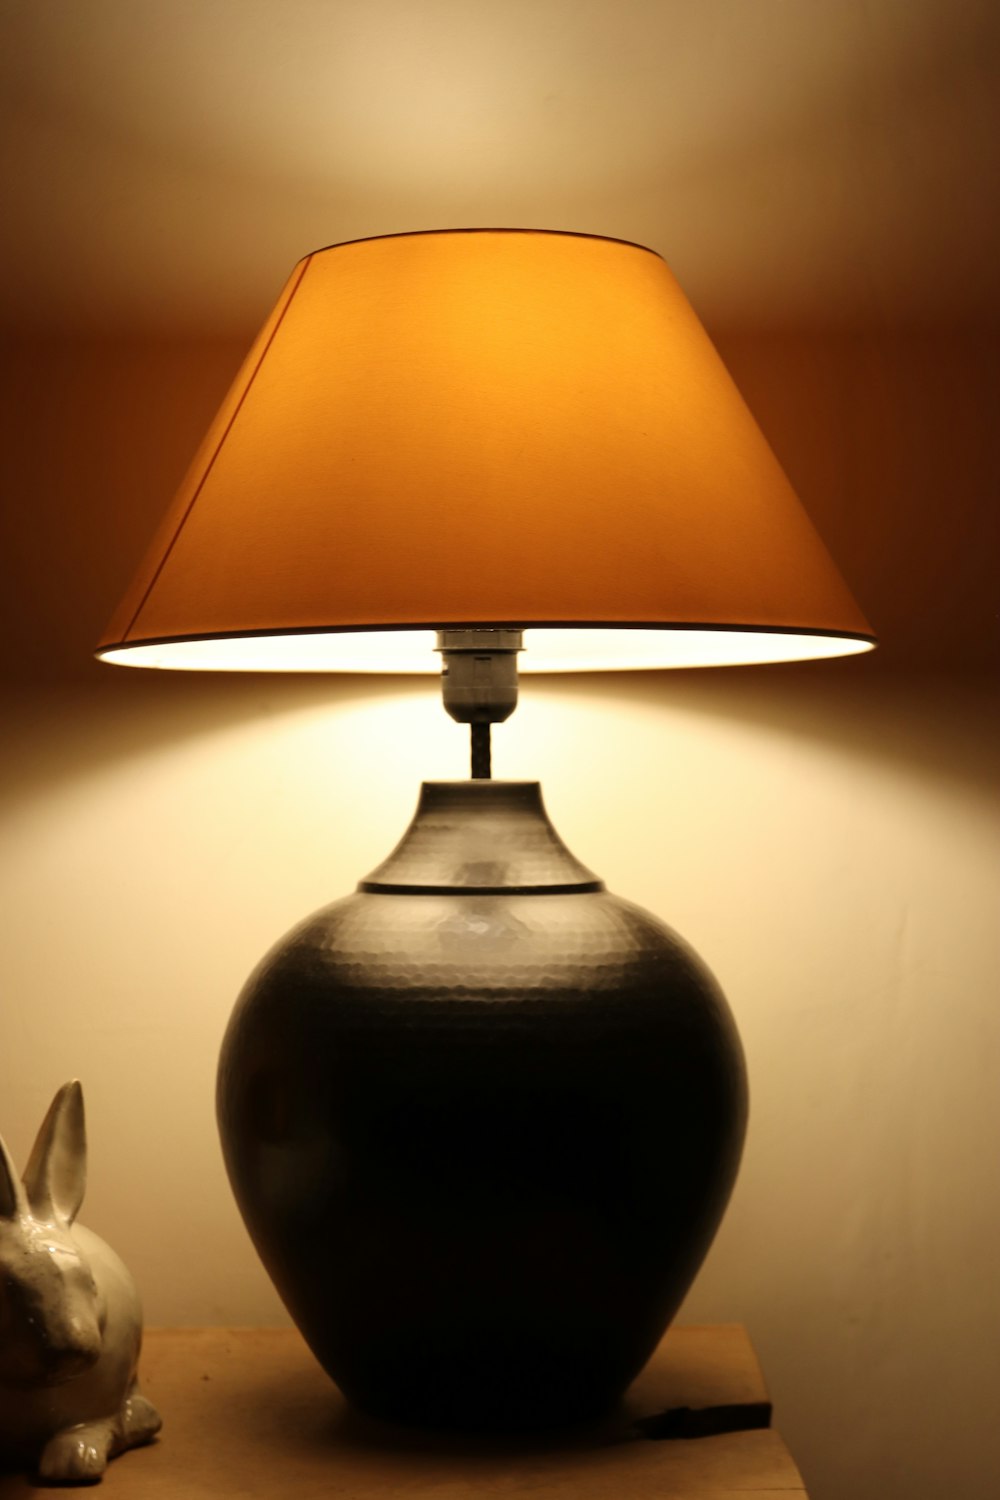 Table Lamp Pictures | Download Free Images on Unsplash